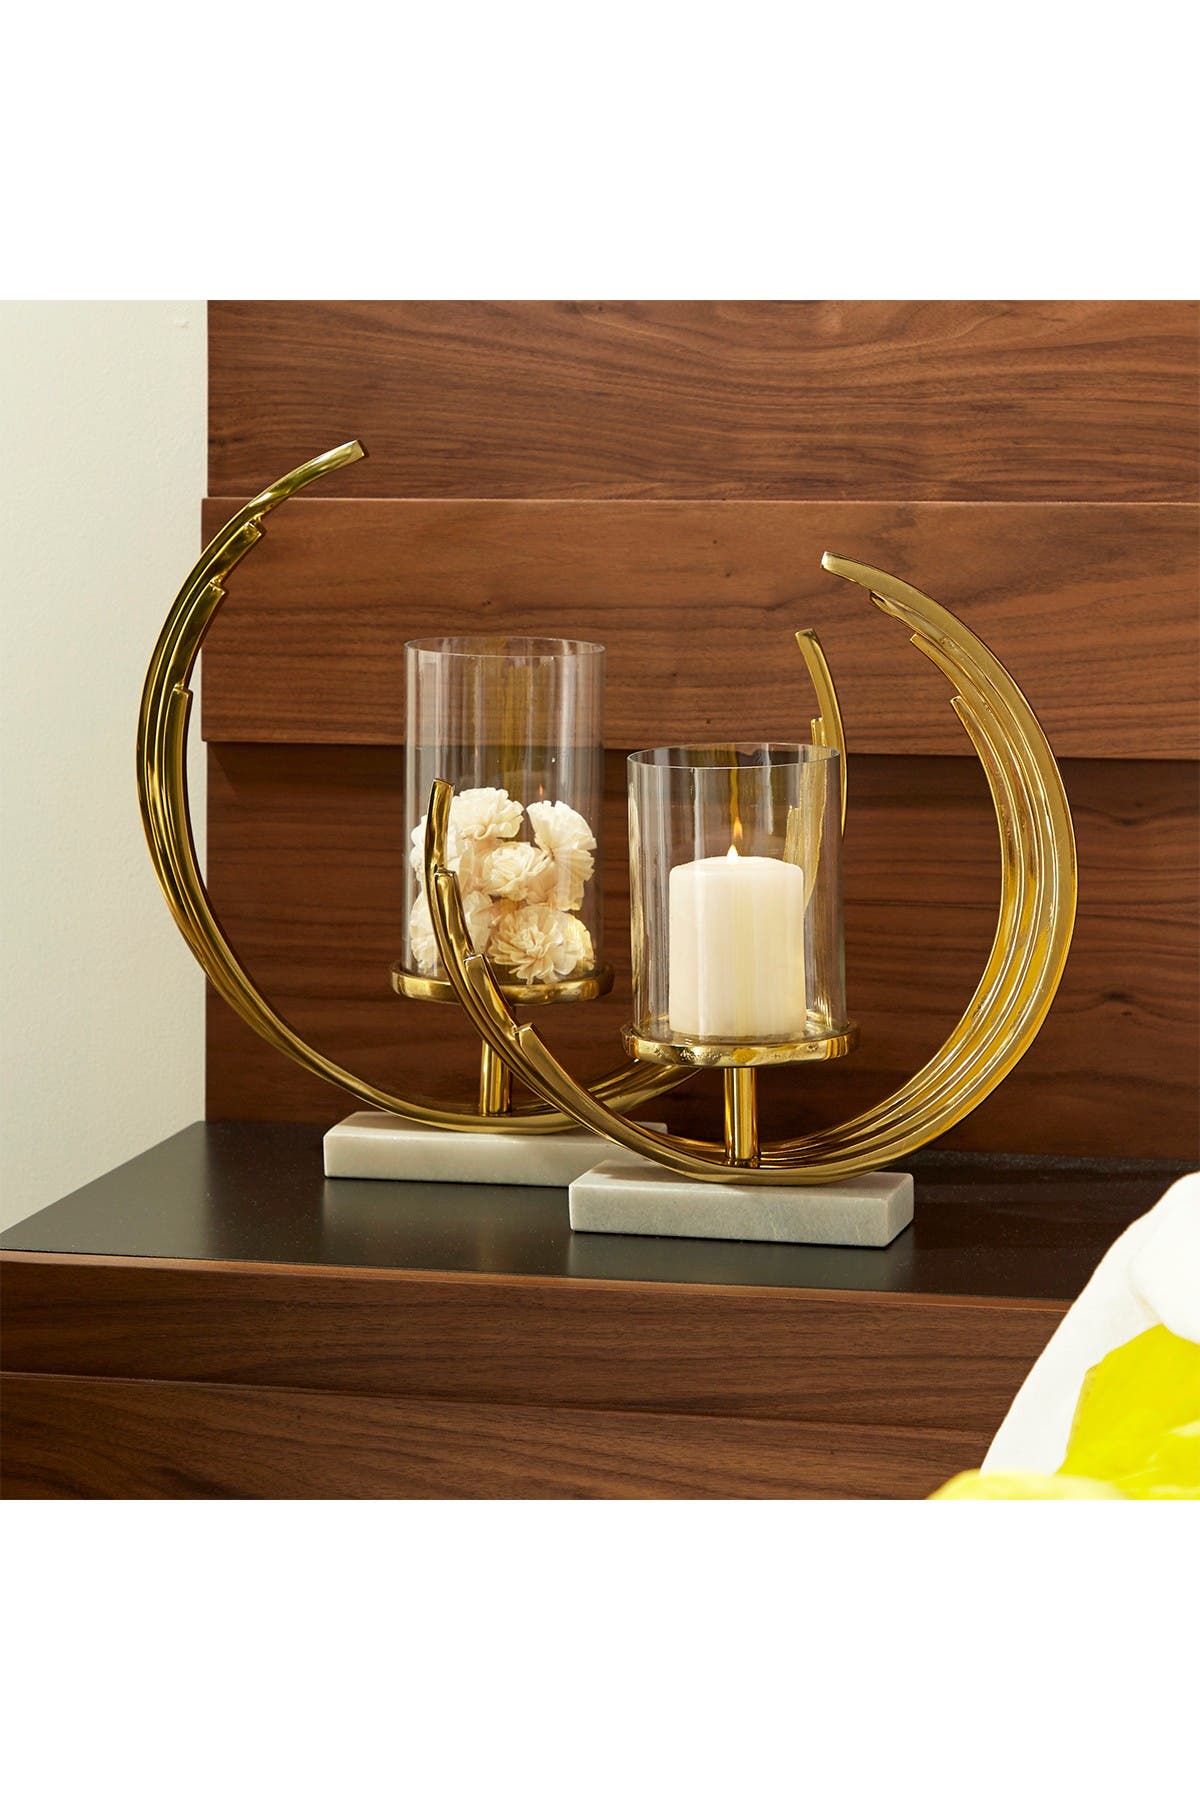 Venus Williams Collection Contemporary Crescent Gold Metal Candle Holders With Marble Bases